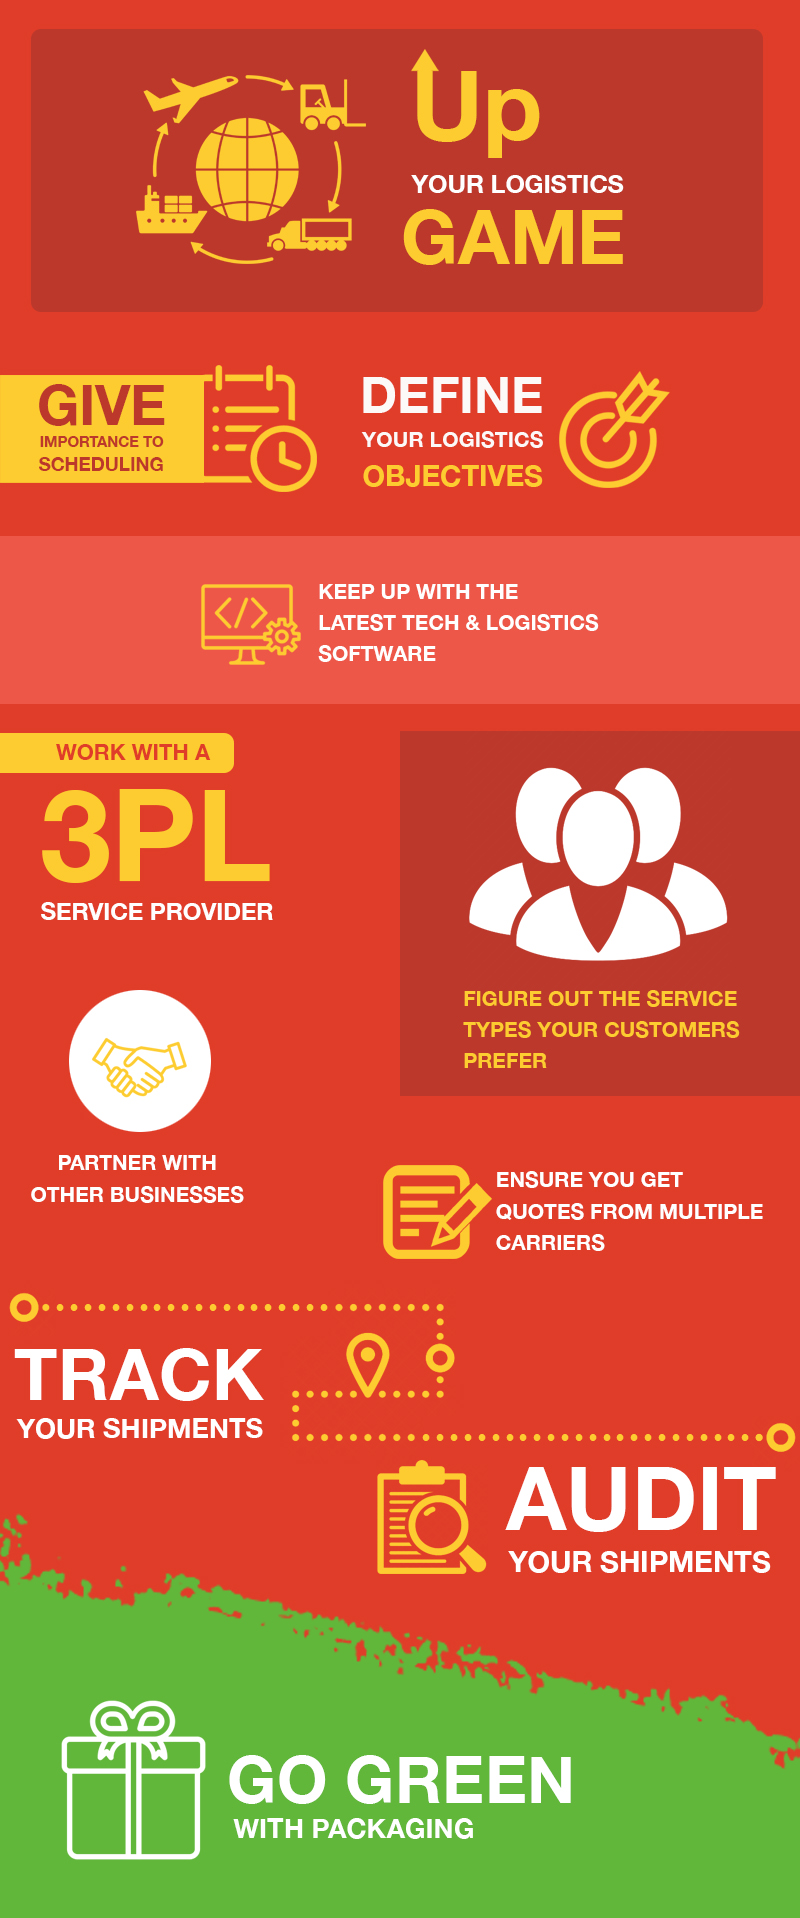 Infographic of some logistics best practices